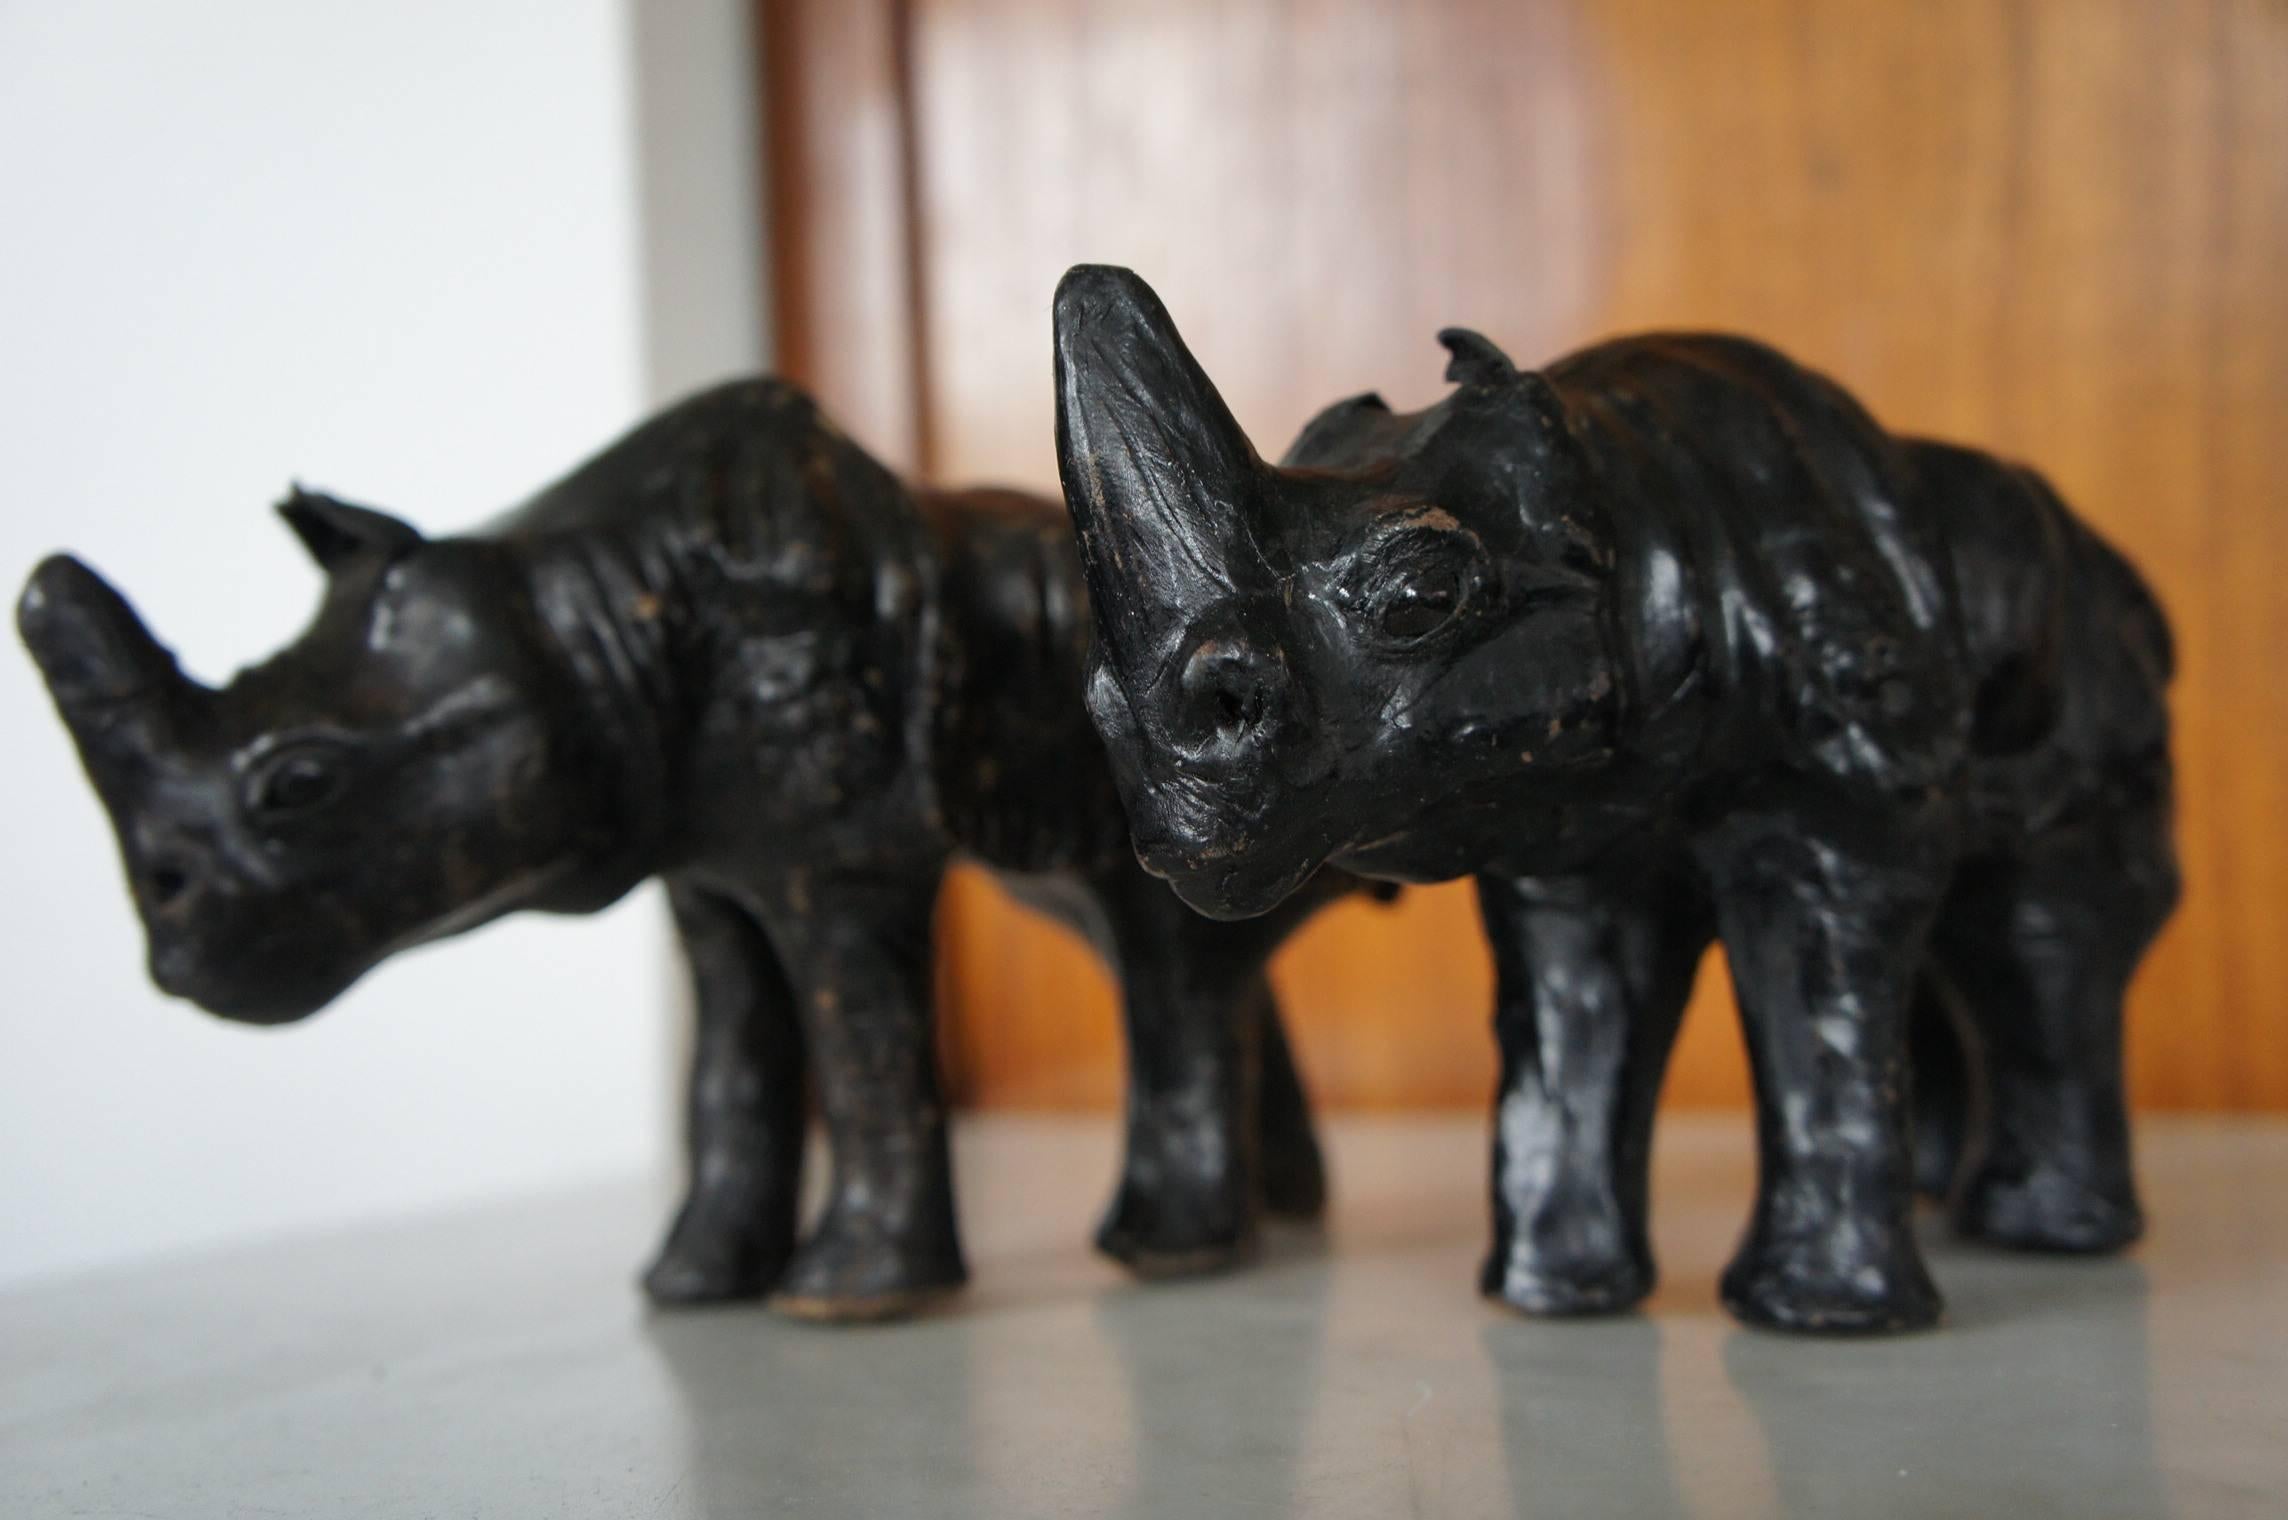 Rare and Small Pair of Black Rhino Sculptures Leather on Wood with Glass Eyes For Sale 2